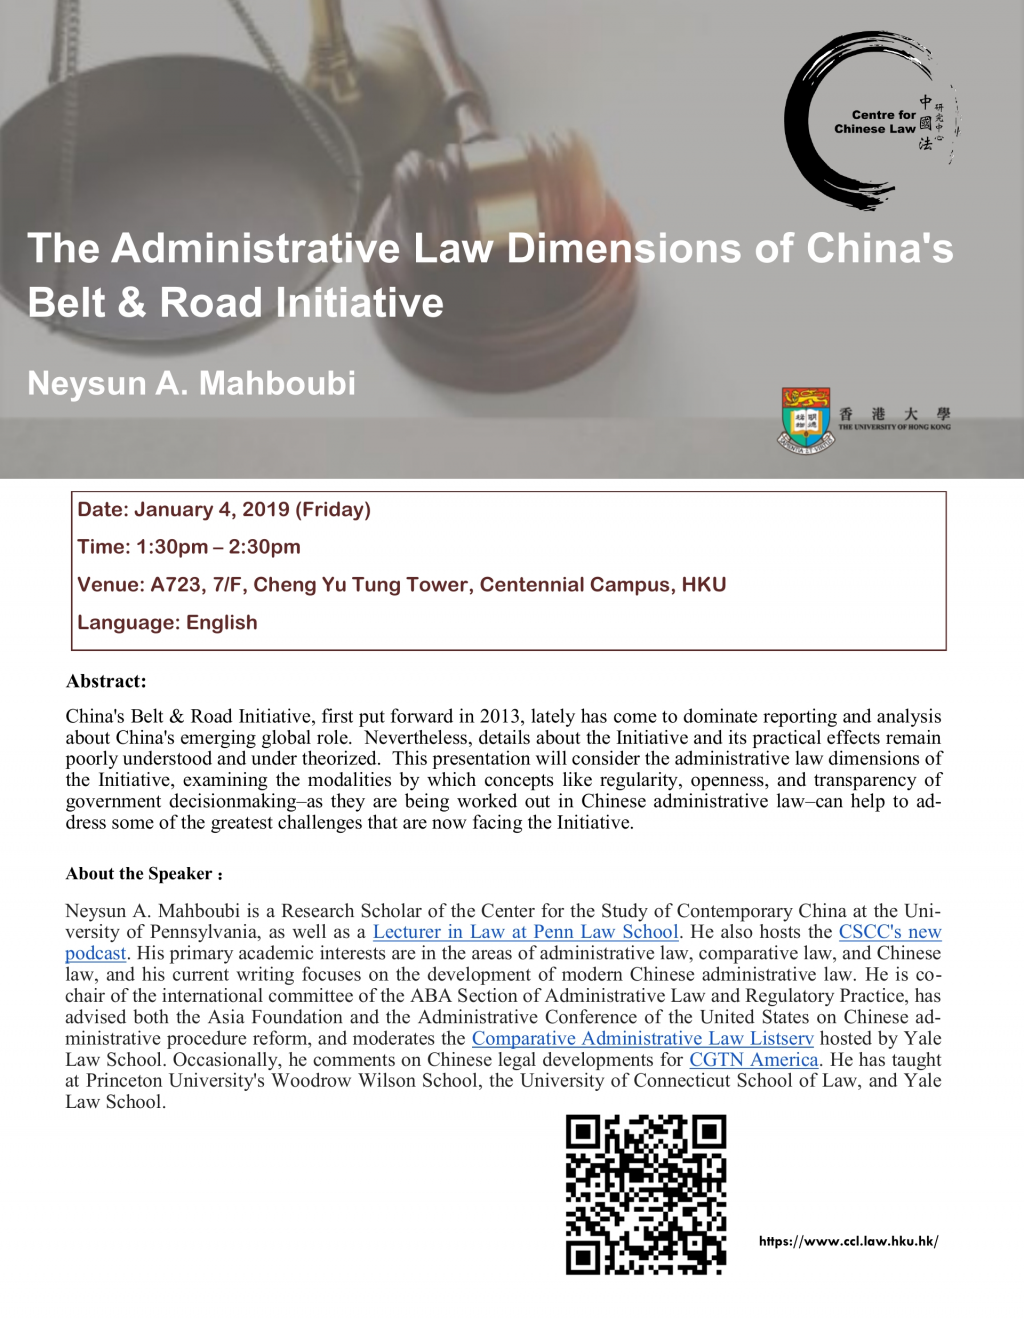 Administrative Law Dimensions of China's Belt & Road Initiative